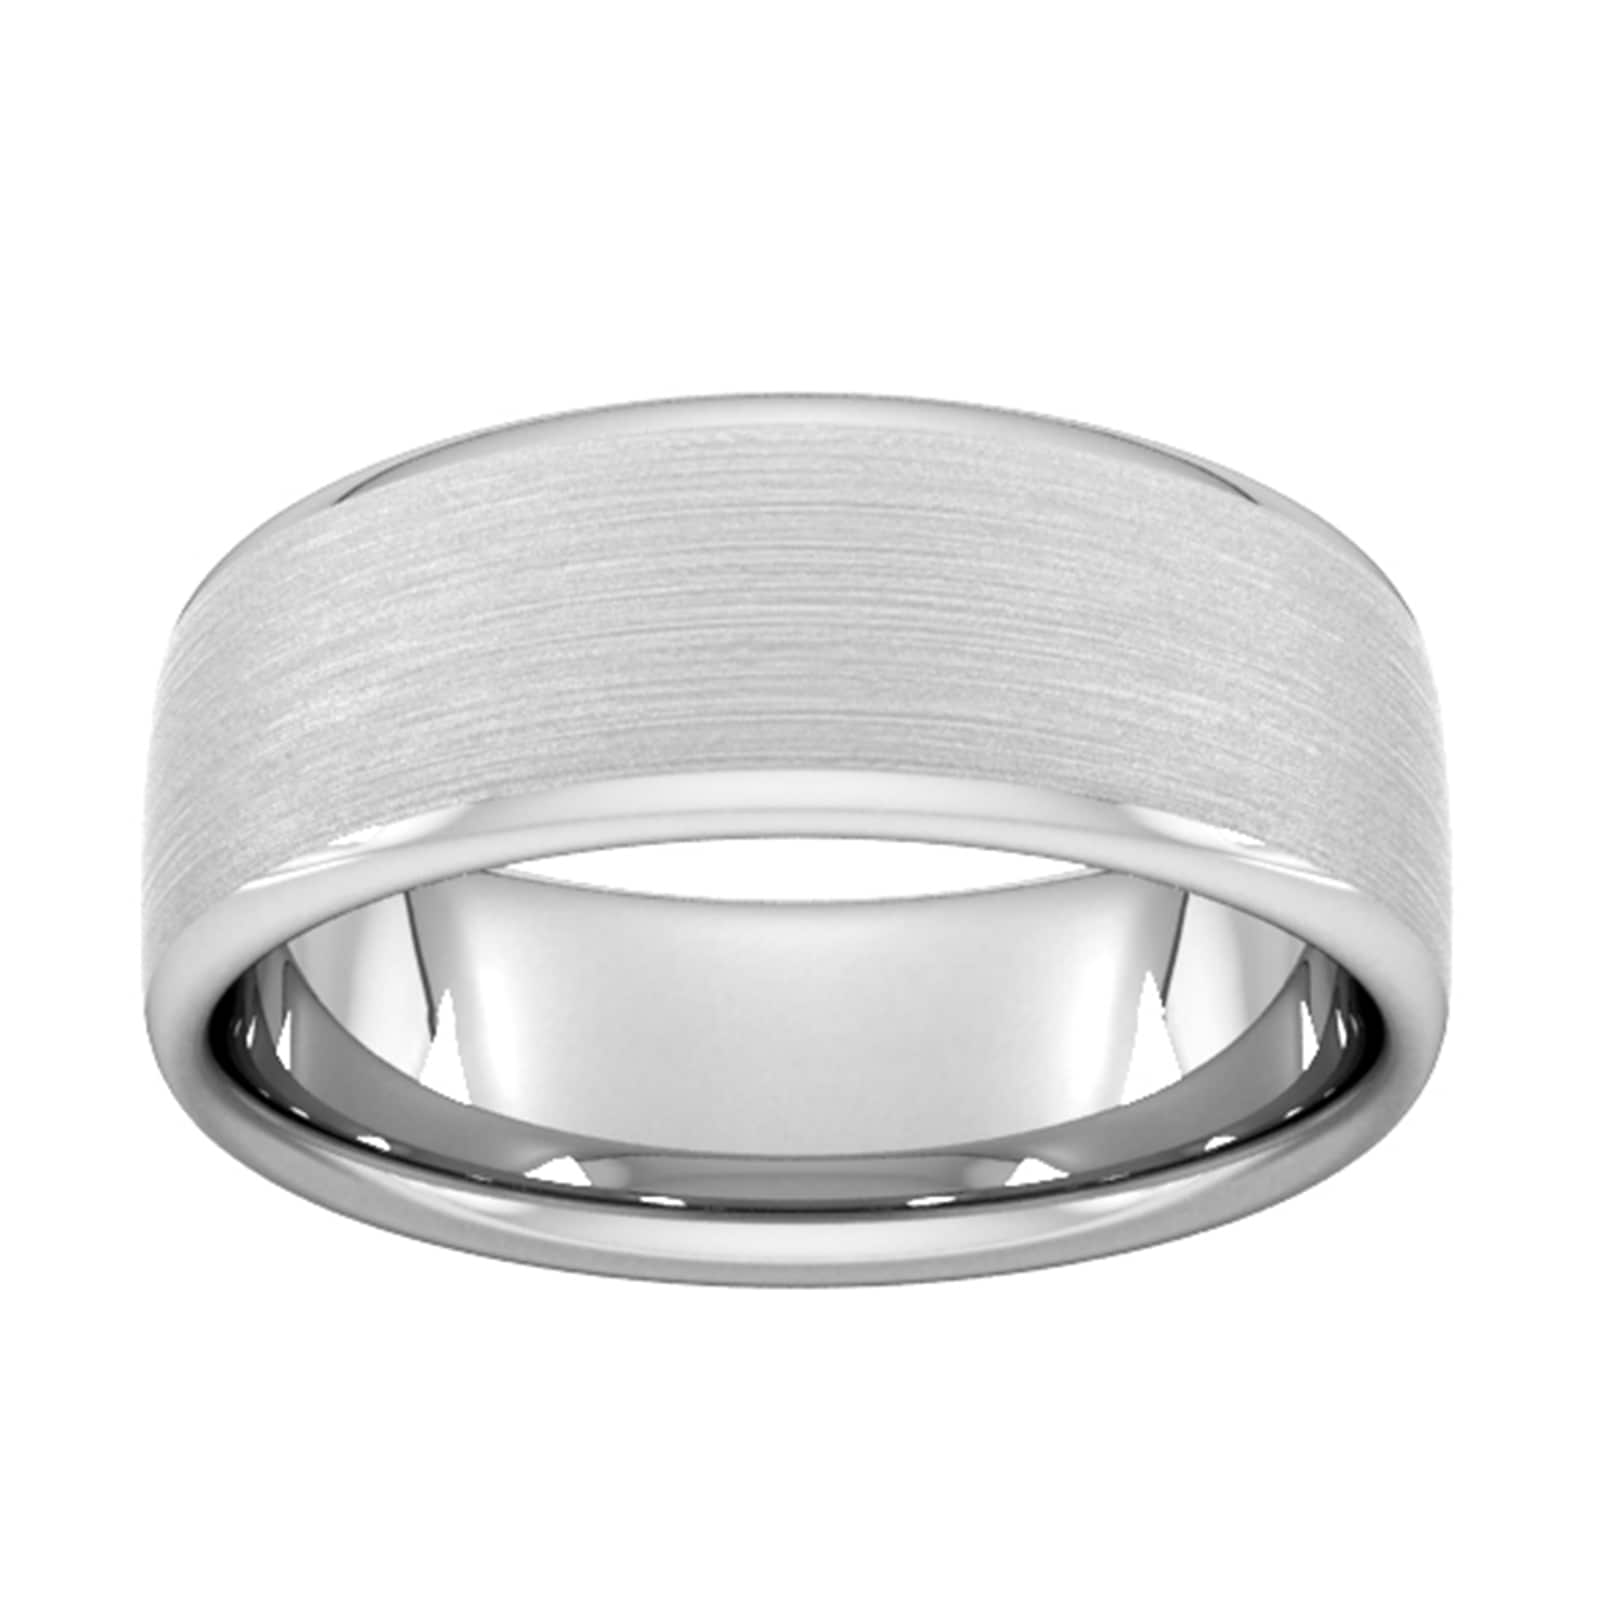 8mm Flat Court Heavy Matt Finished Wedding Ring In 18 Carat White Gold - Ring Size P